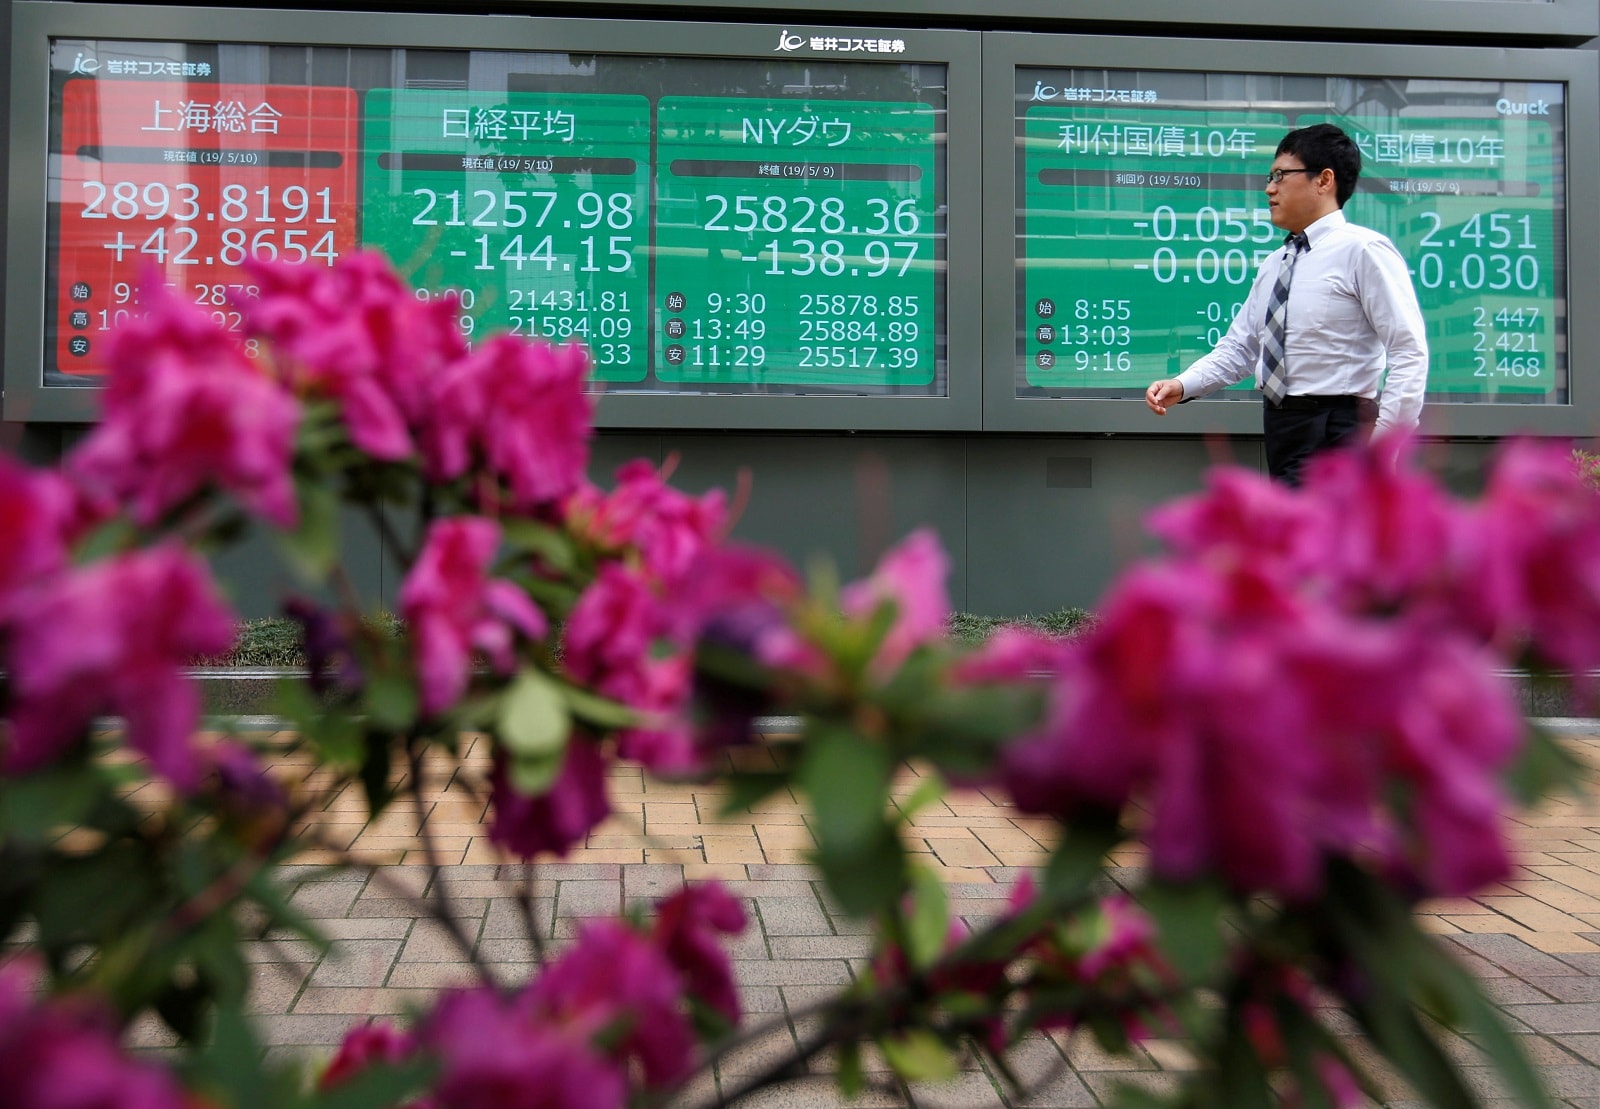 1. Asia: Stocks in Asia-Pacific were mixed in Monday morning trade as investors await the release of China’s benchmark lending rate. South Korea’s Kospi recovered from an earlier dip as it rose 0.34 percent in morning trade as shares of Hyundai Motor jumped more than 3 percent. Over in Australia, the S&P/ASX 200 was fractionally lower. Overall, the MSCI Asia ex-Japan index traded little changed. Markets in Japan are closed on Monday for a holiday, reported CNBC International. (Image: Reuters)